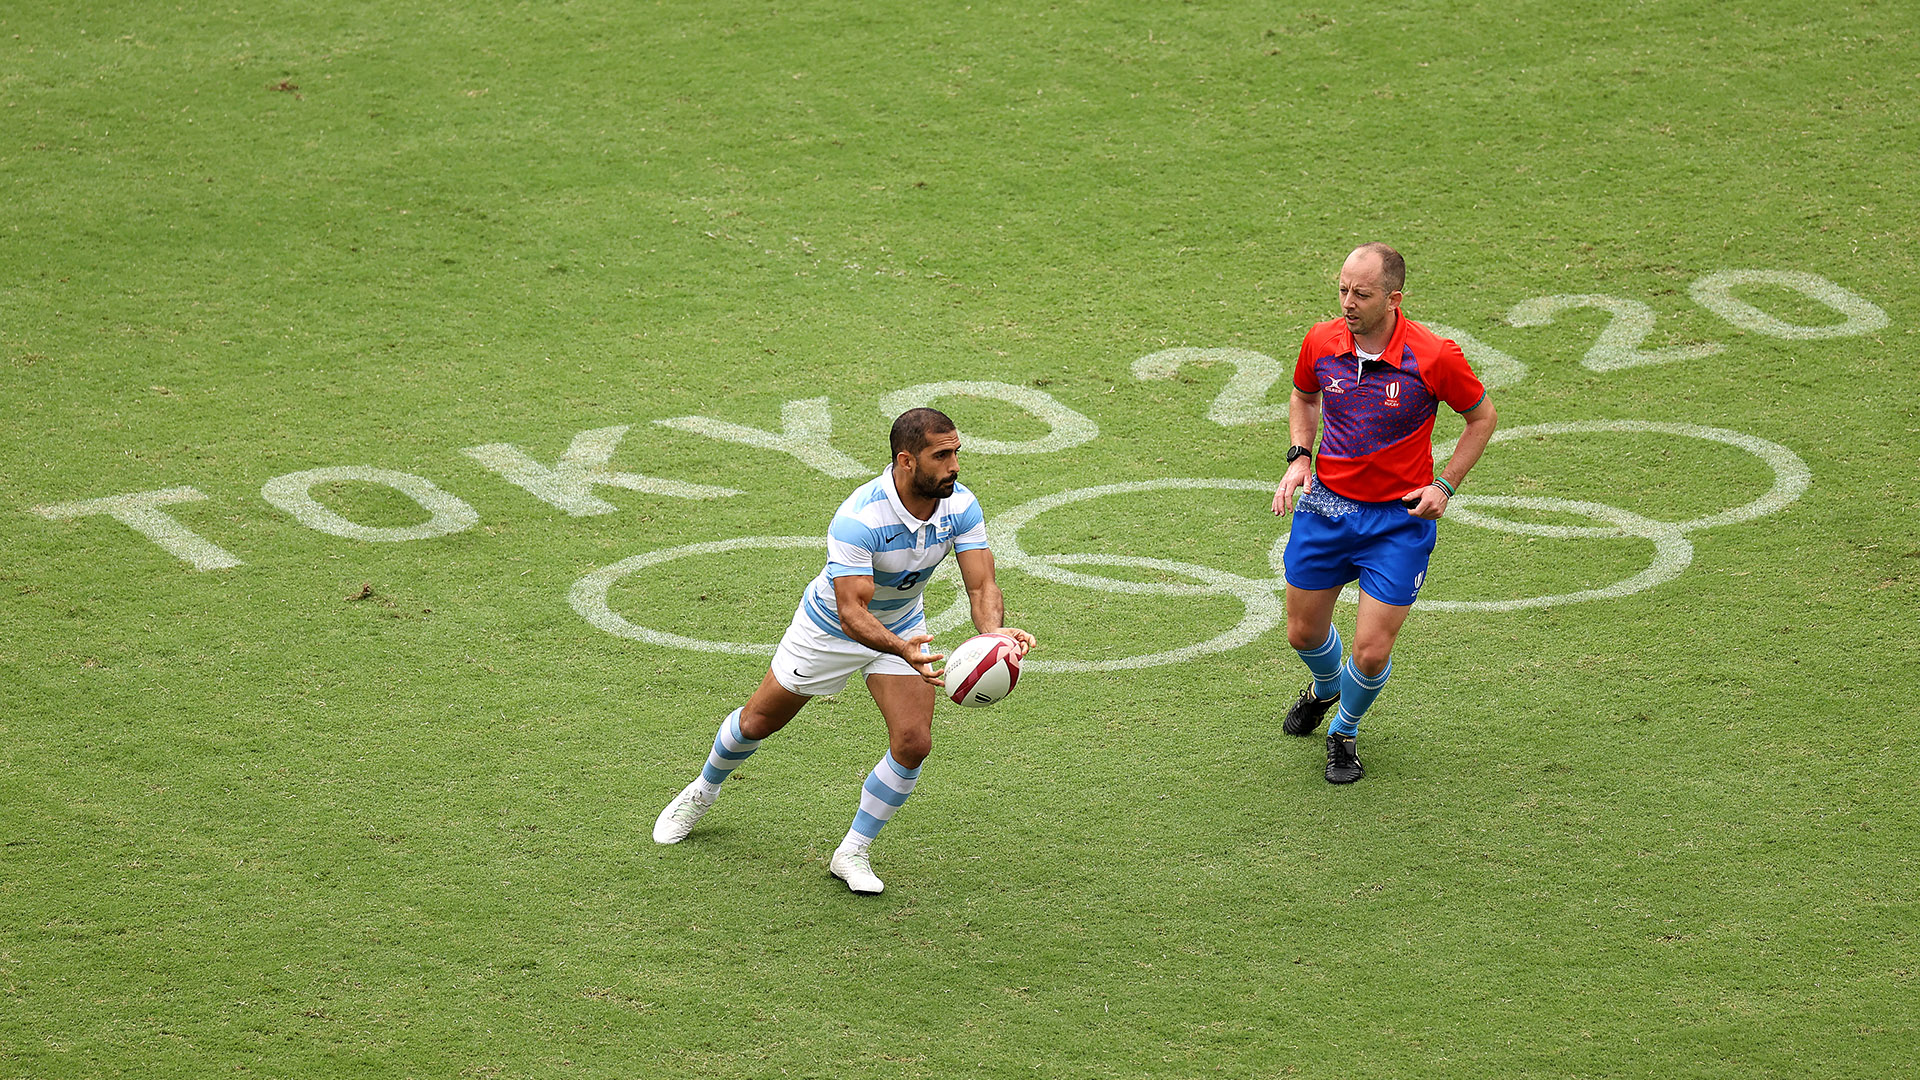 Rugby 7s: the Olympic sports that are here to stay